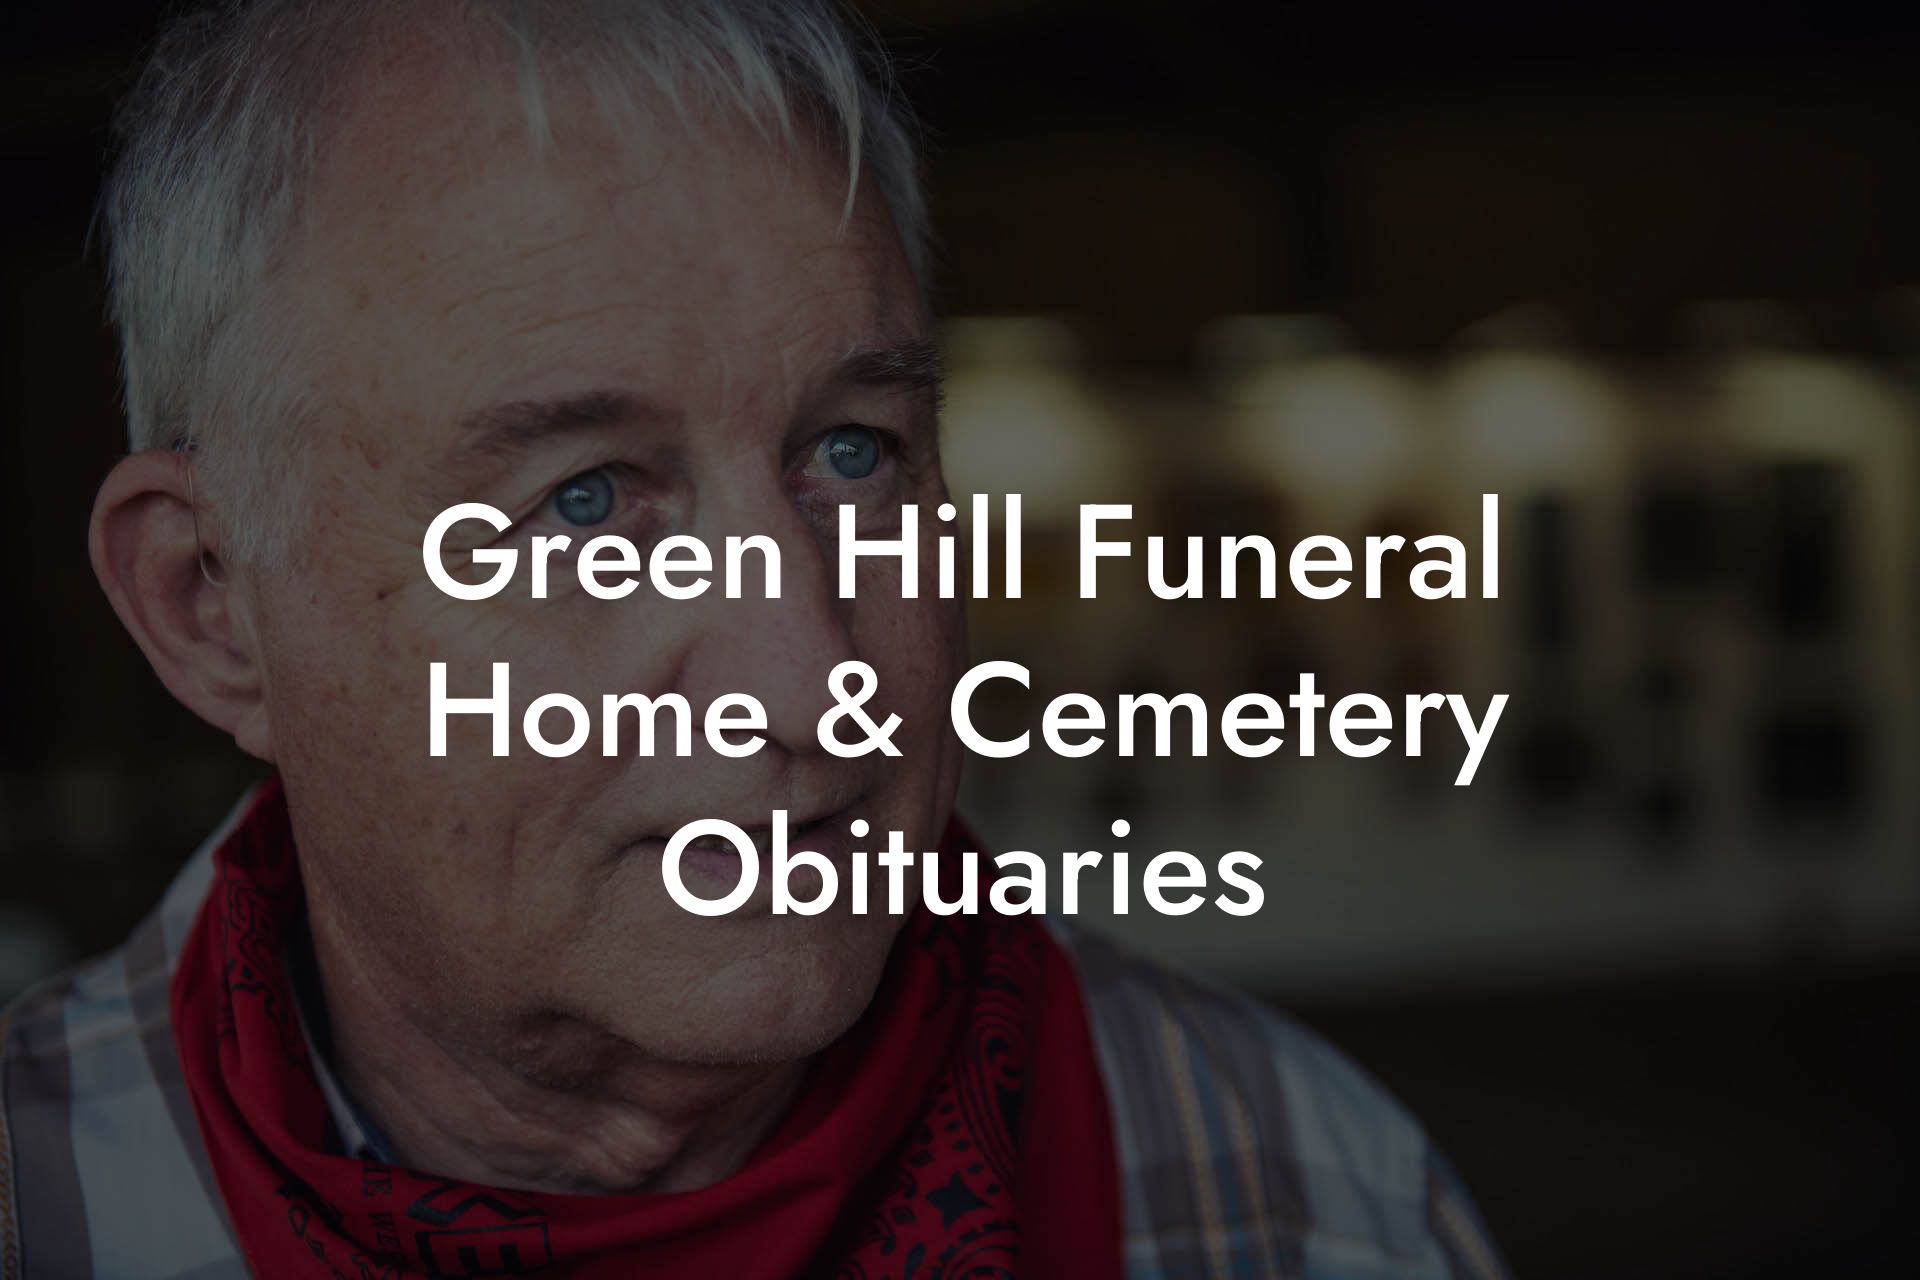 Green Hill Funeral Home & Cemetery Obituaries